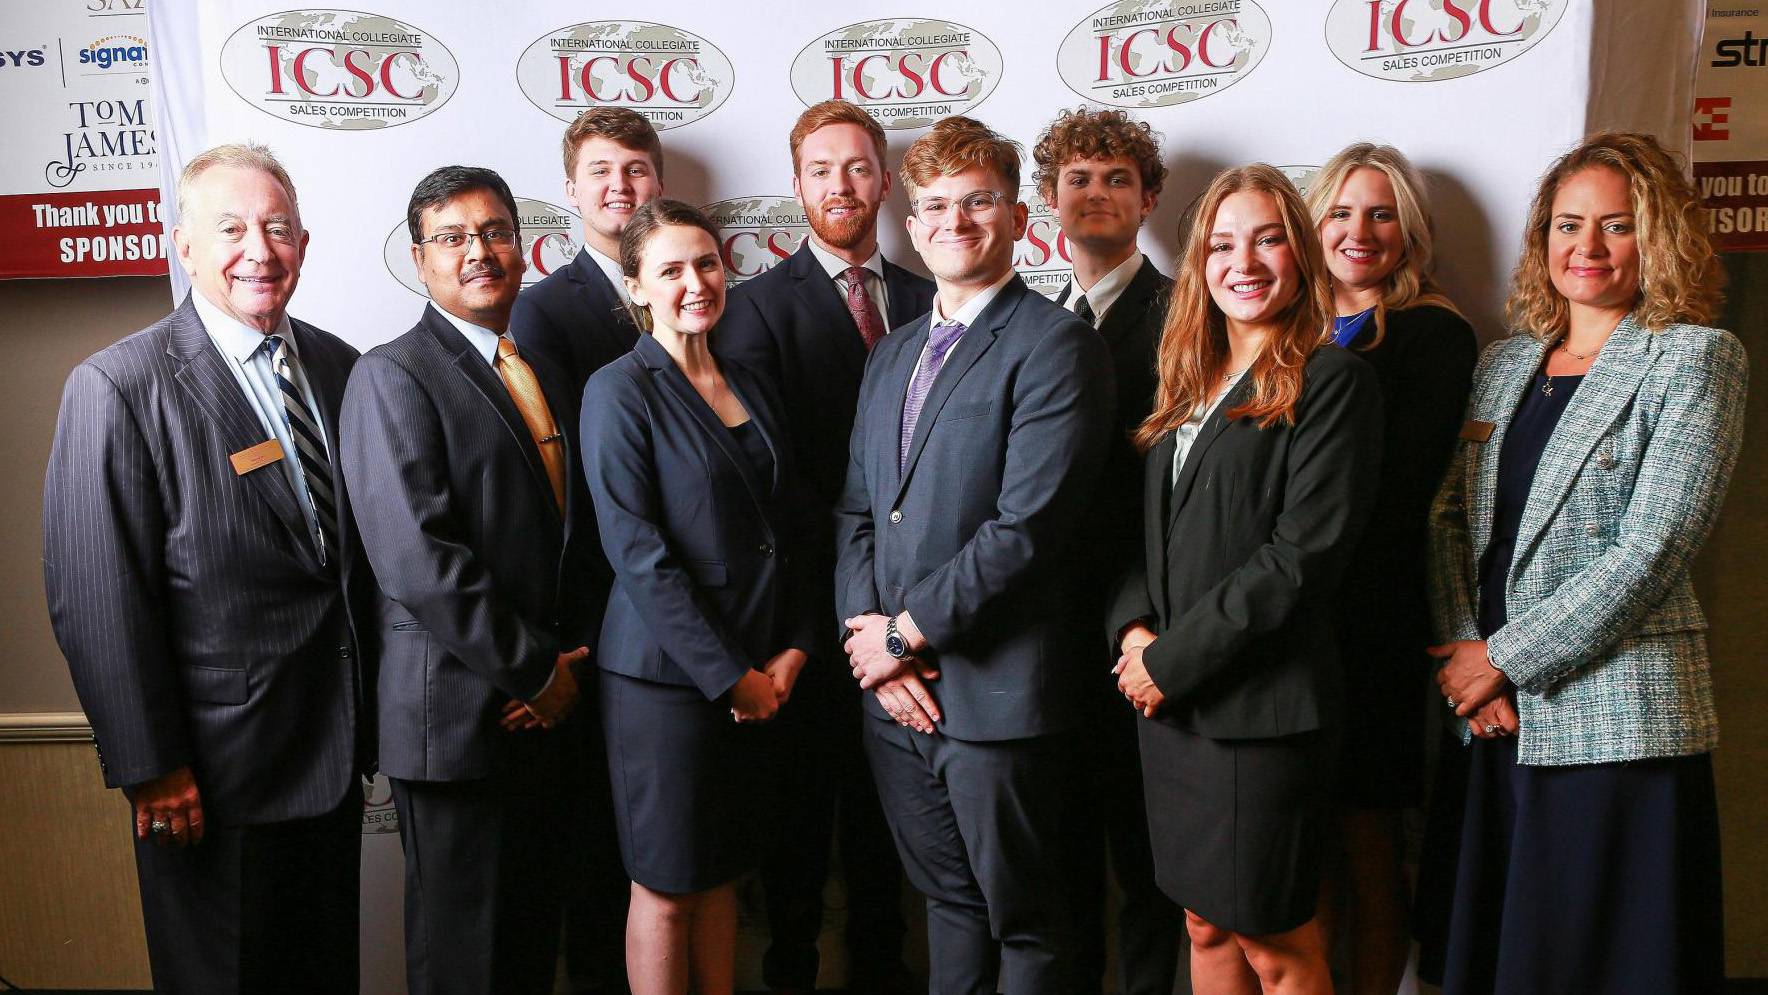 Sales Team at ICSC competition